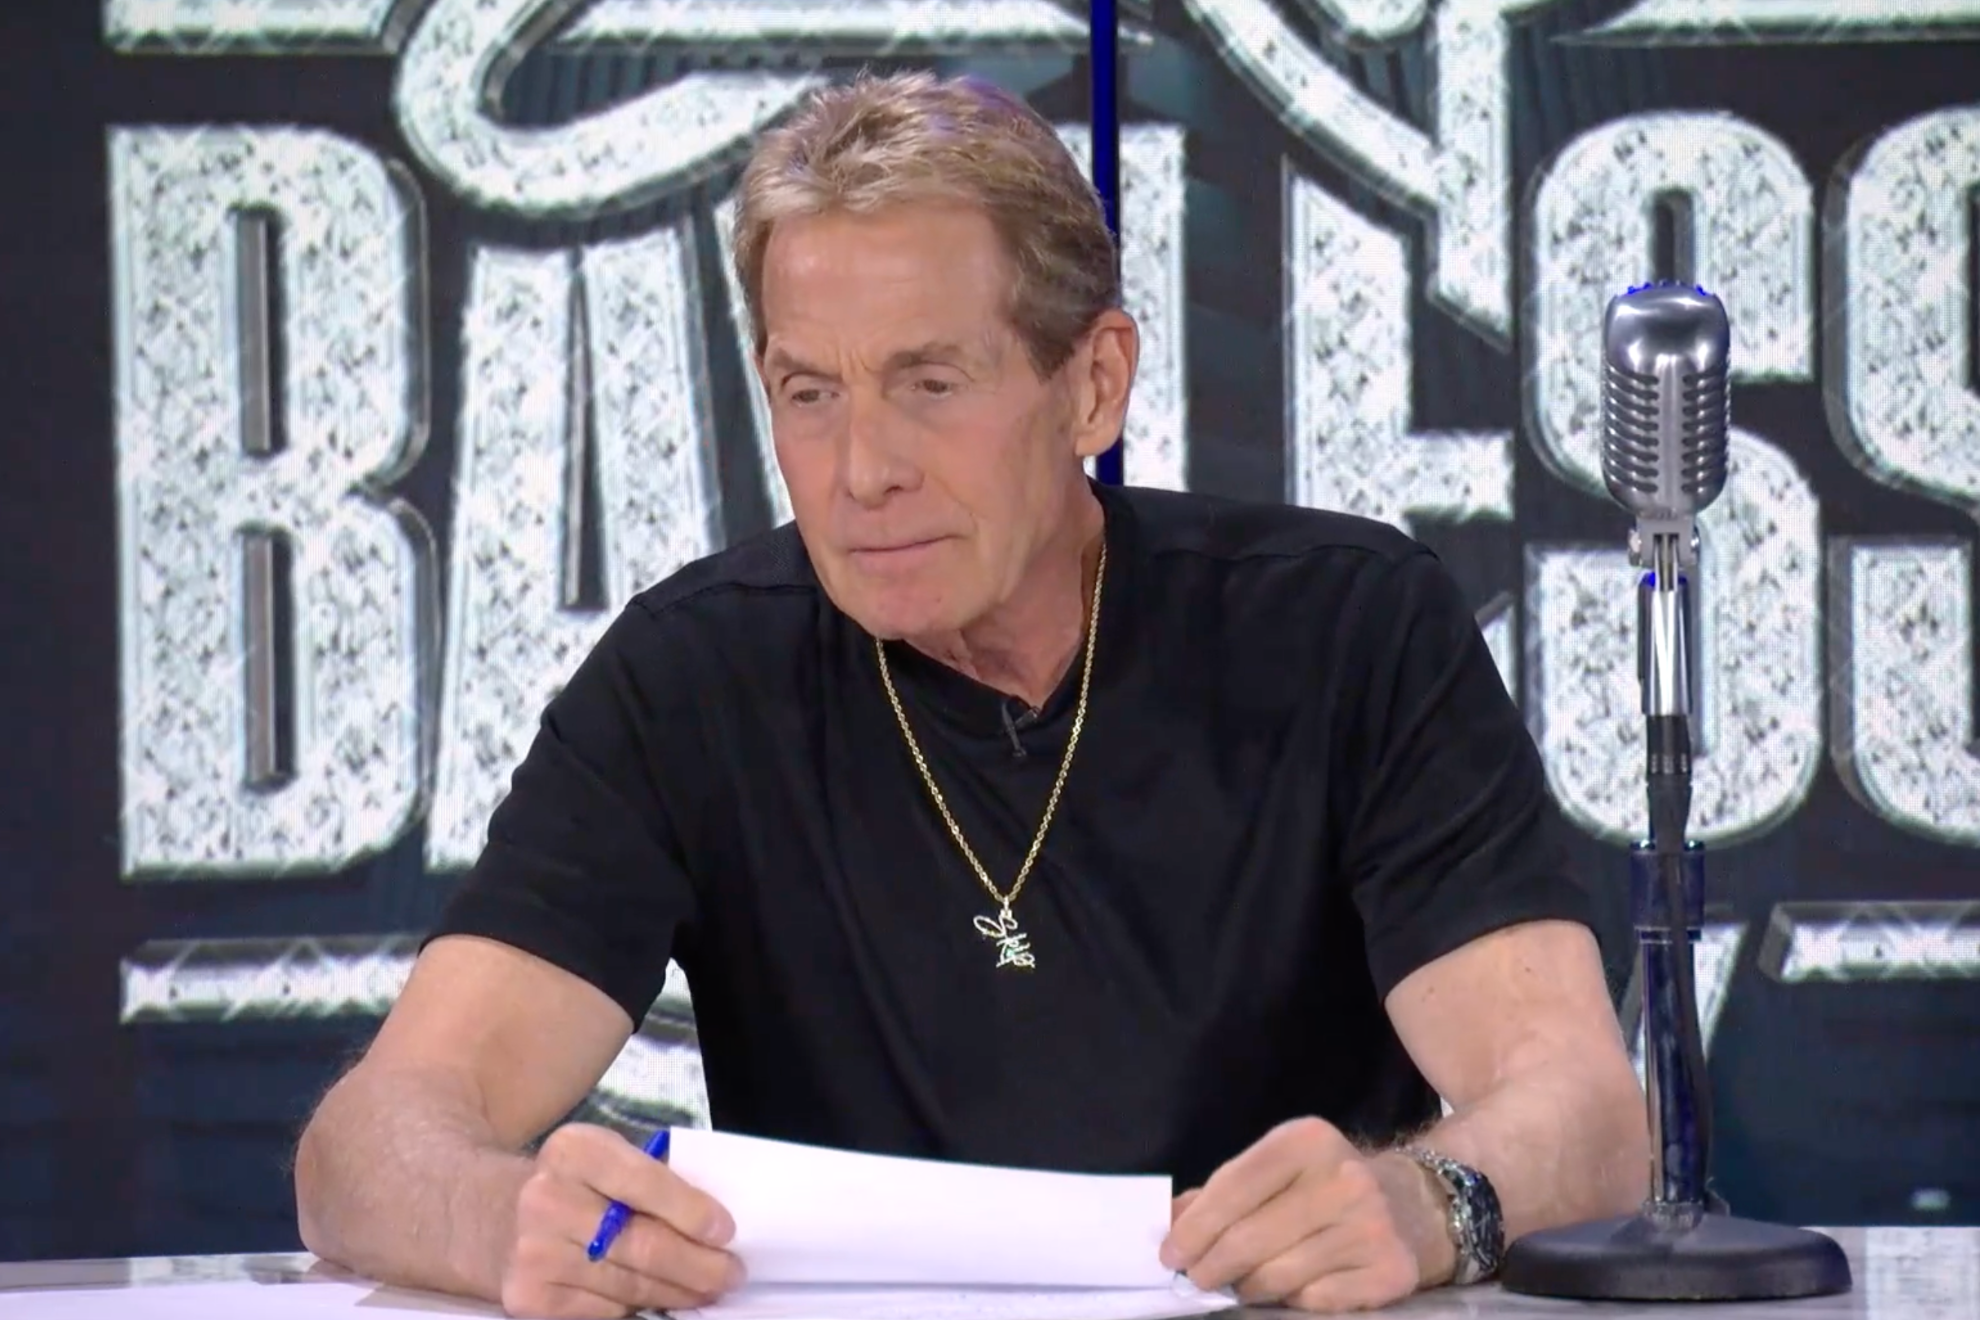 Skip Bayless relives the Cowboys playoff loss.